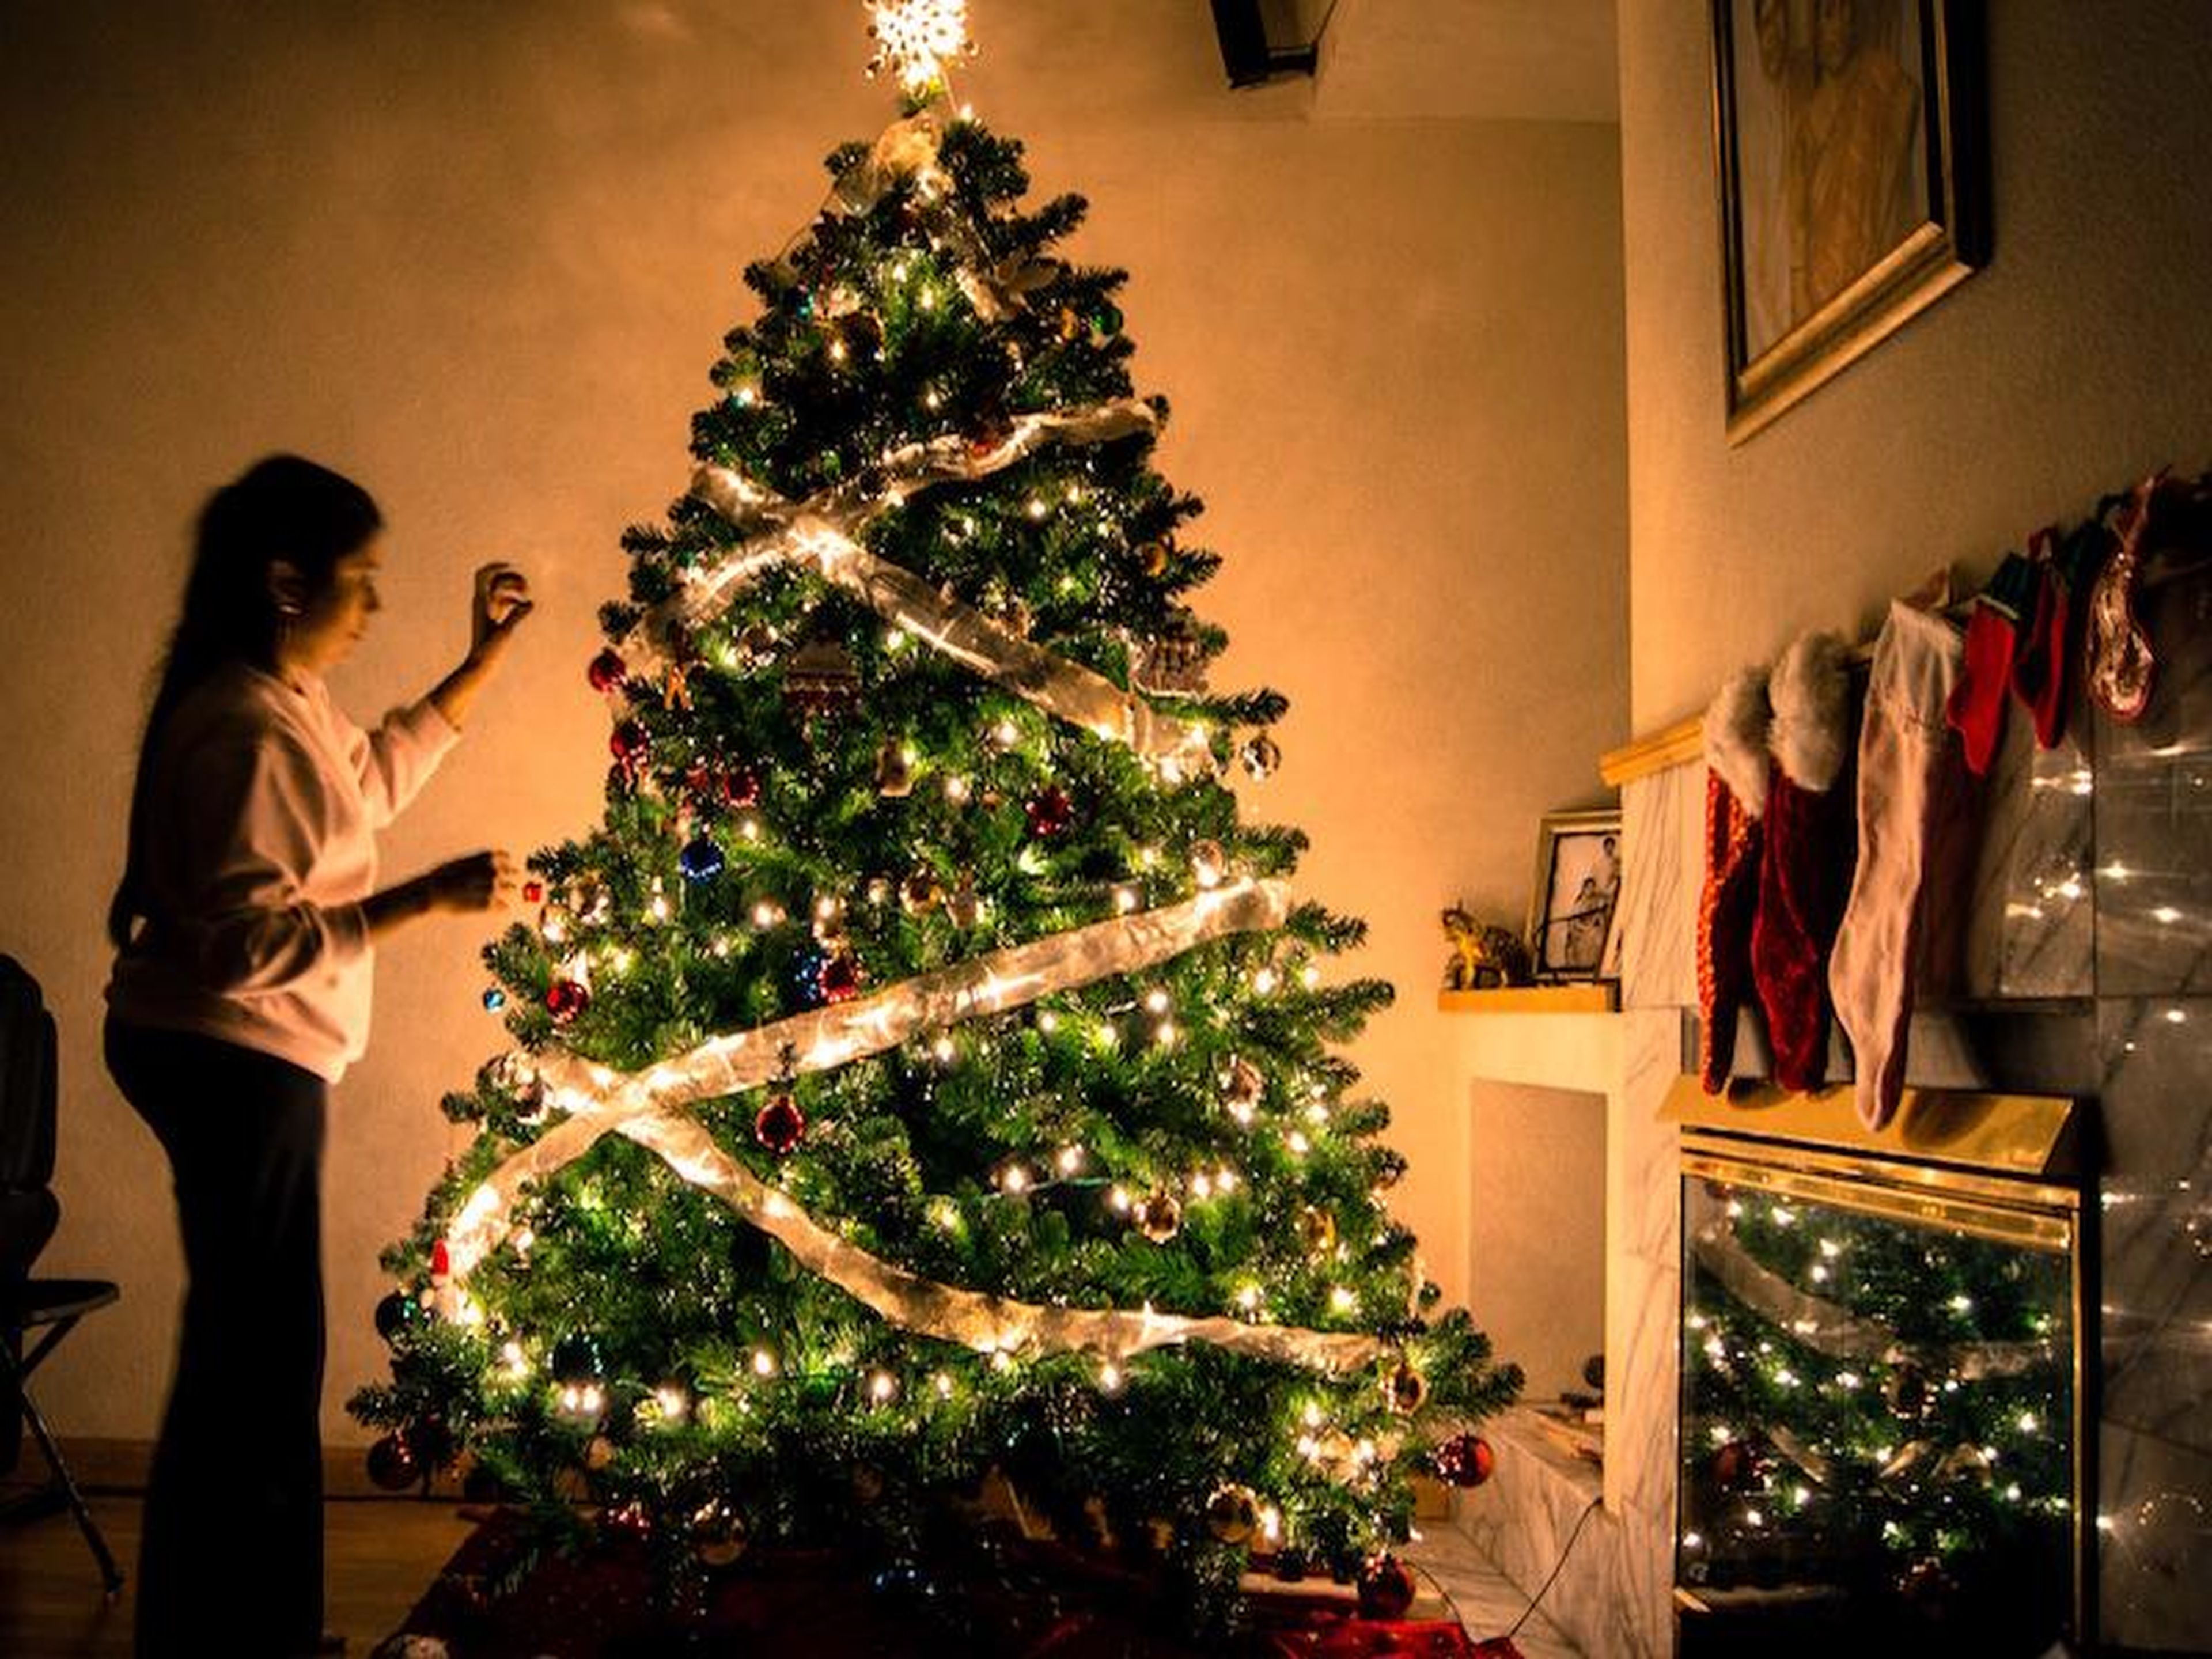 Decorating the Christmas tree is common tradition around the world.